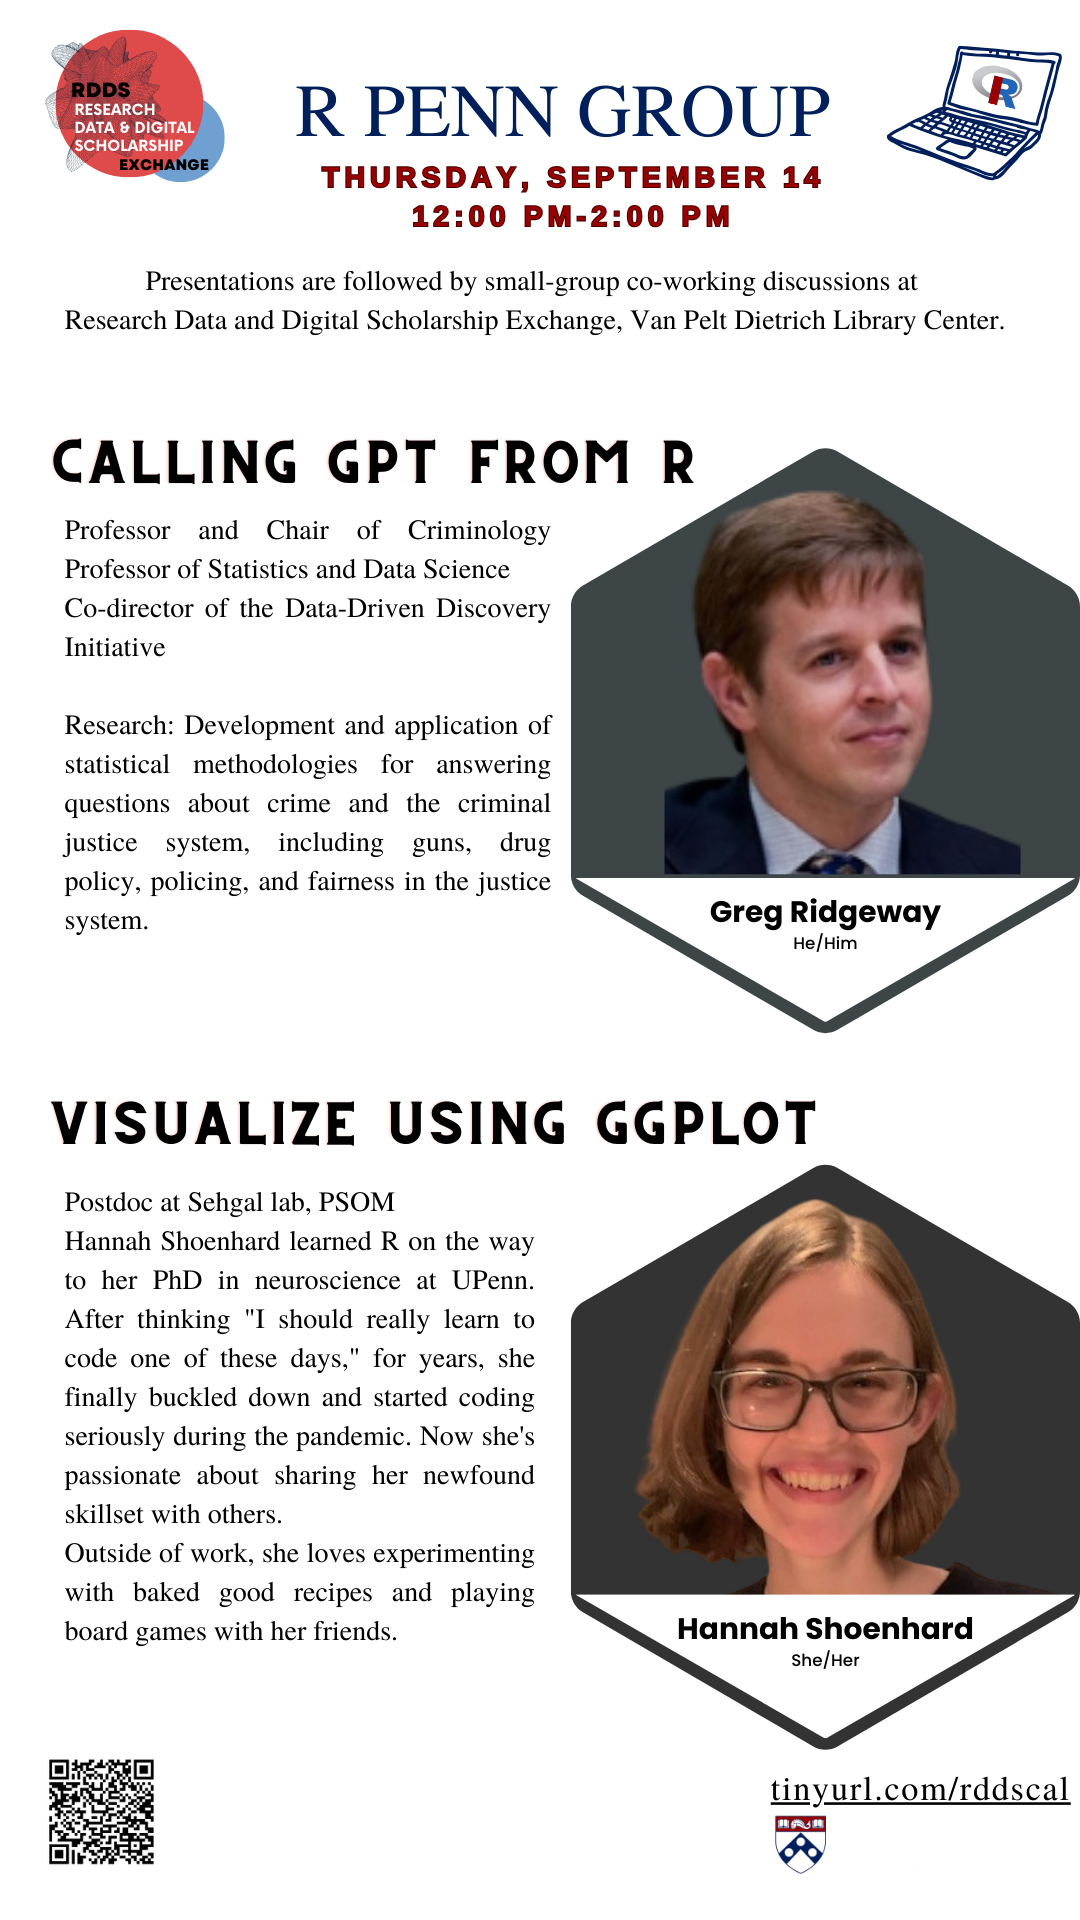 flyer with information on speakers for RPenn group: Greg and Hannah Shoenhard.